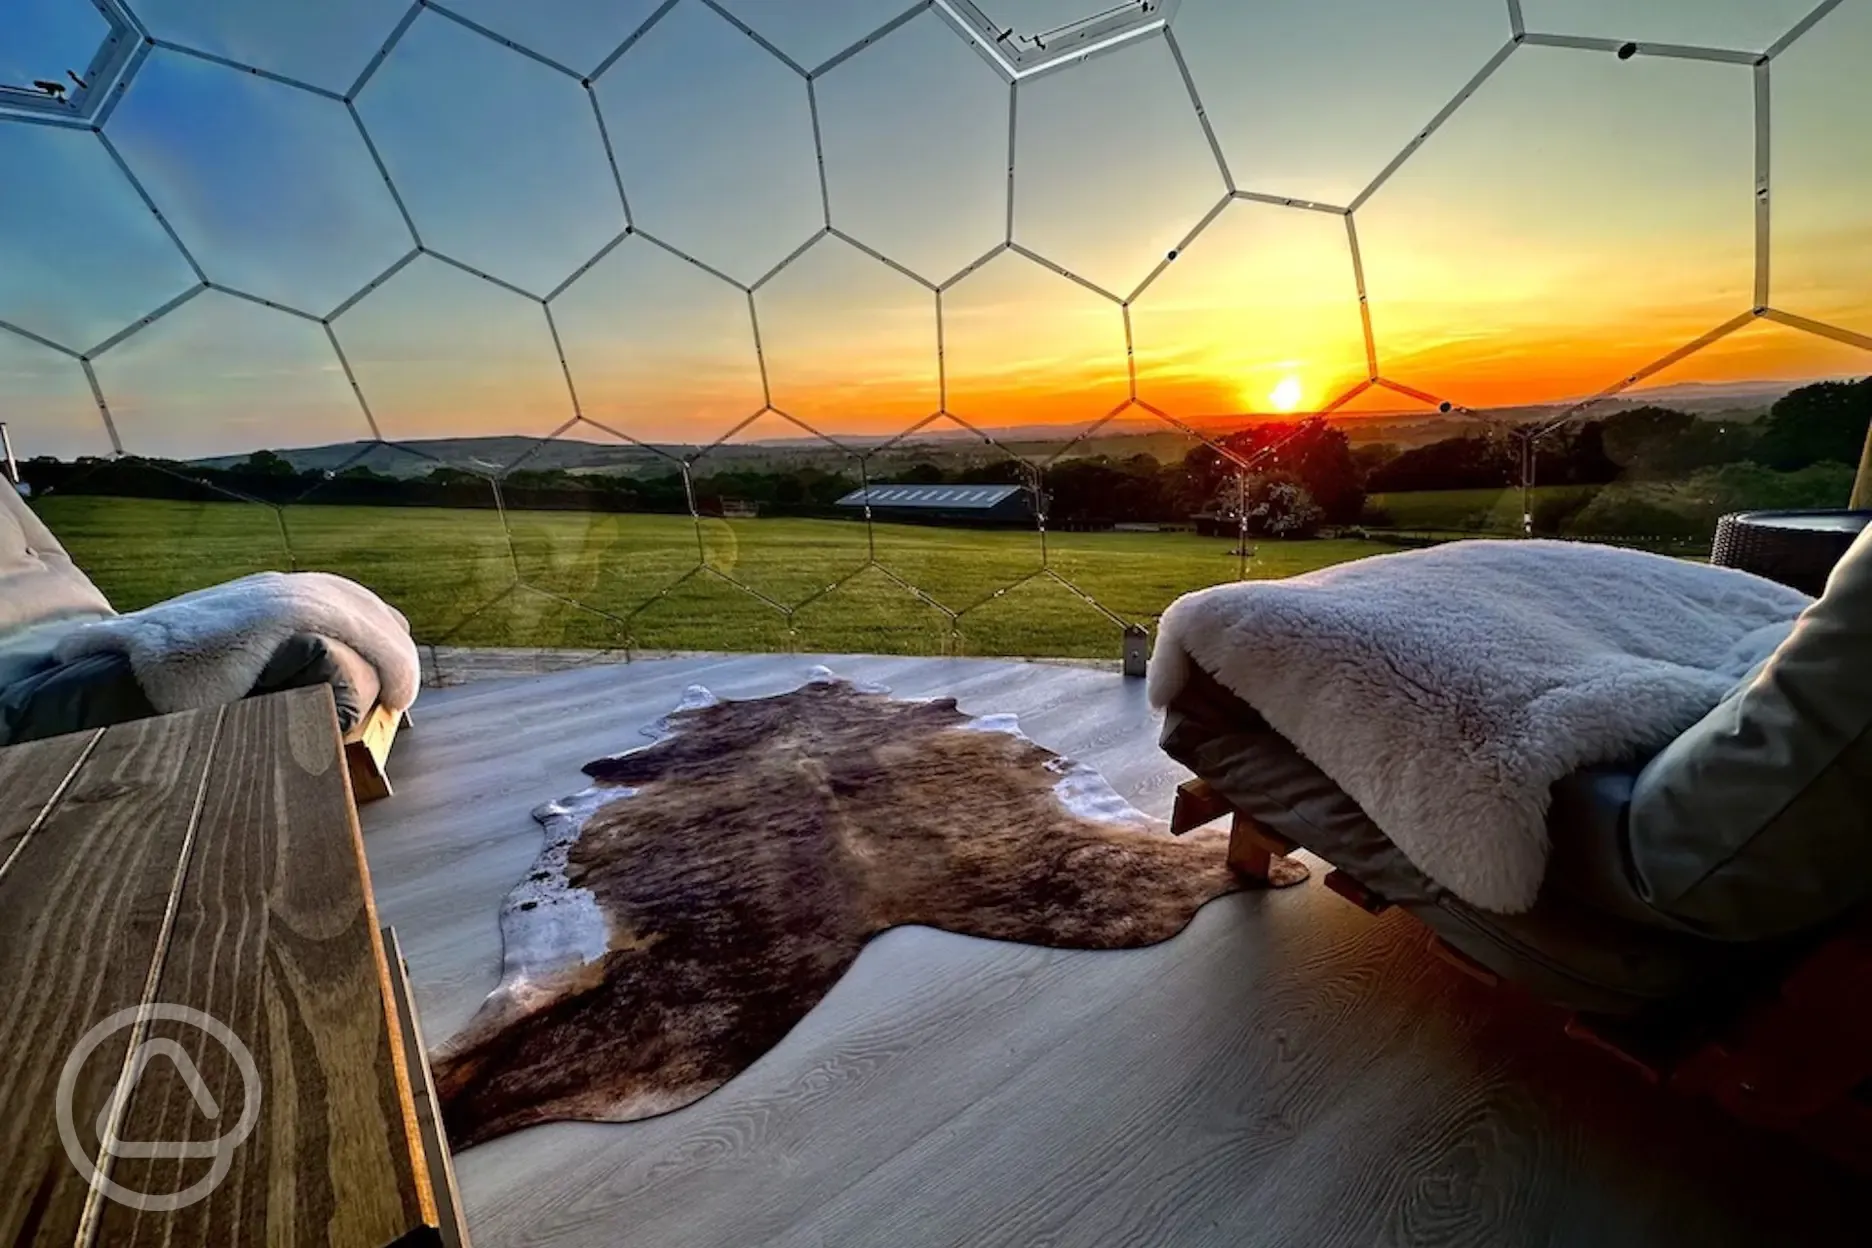 Sunset view from inside the glamping domes